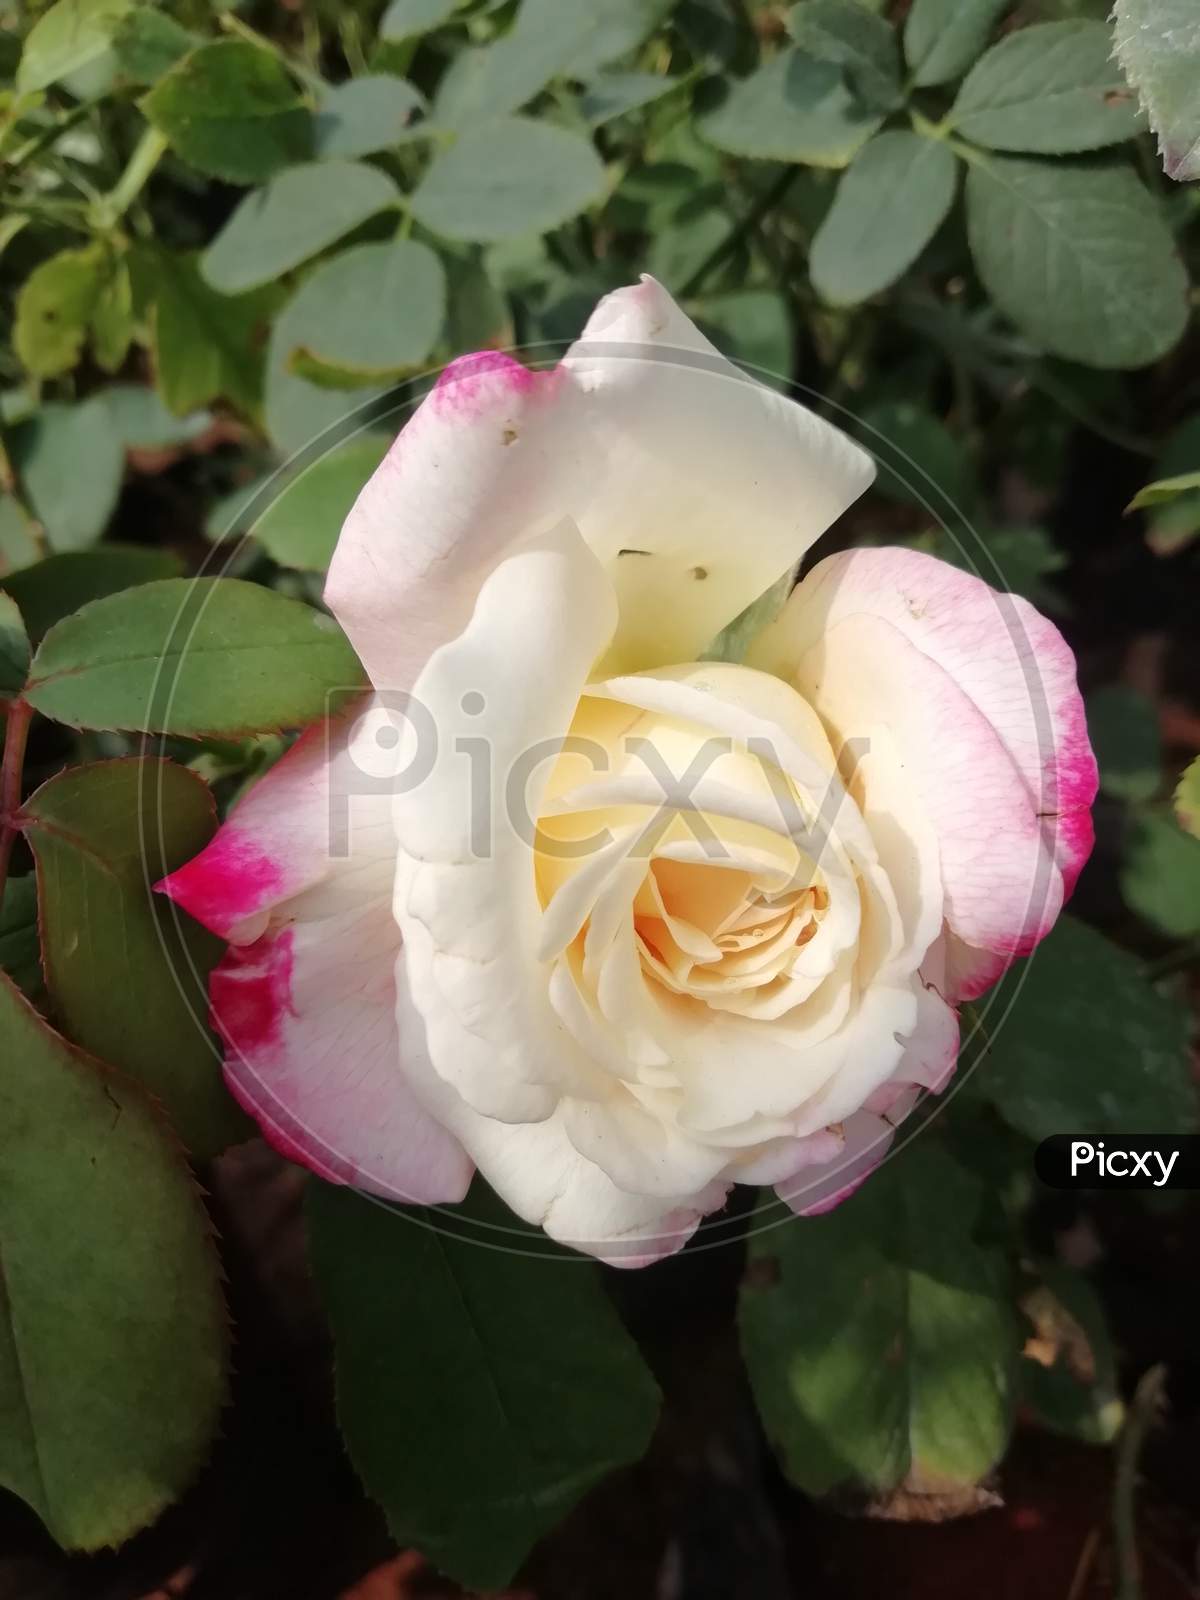 White rose with pink border close up view